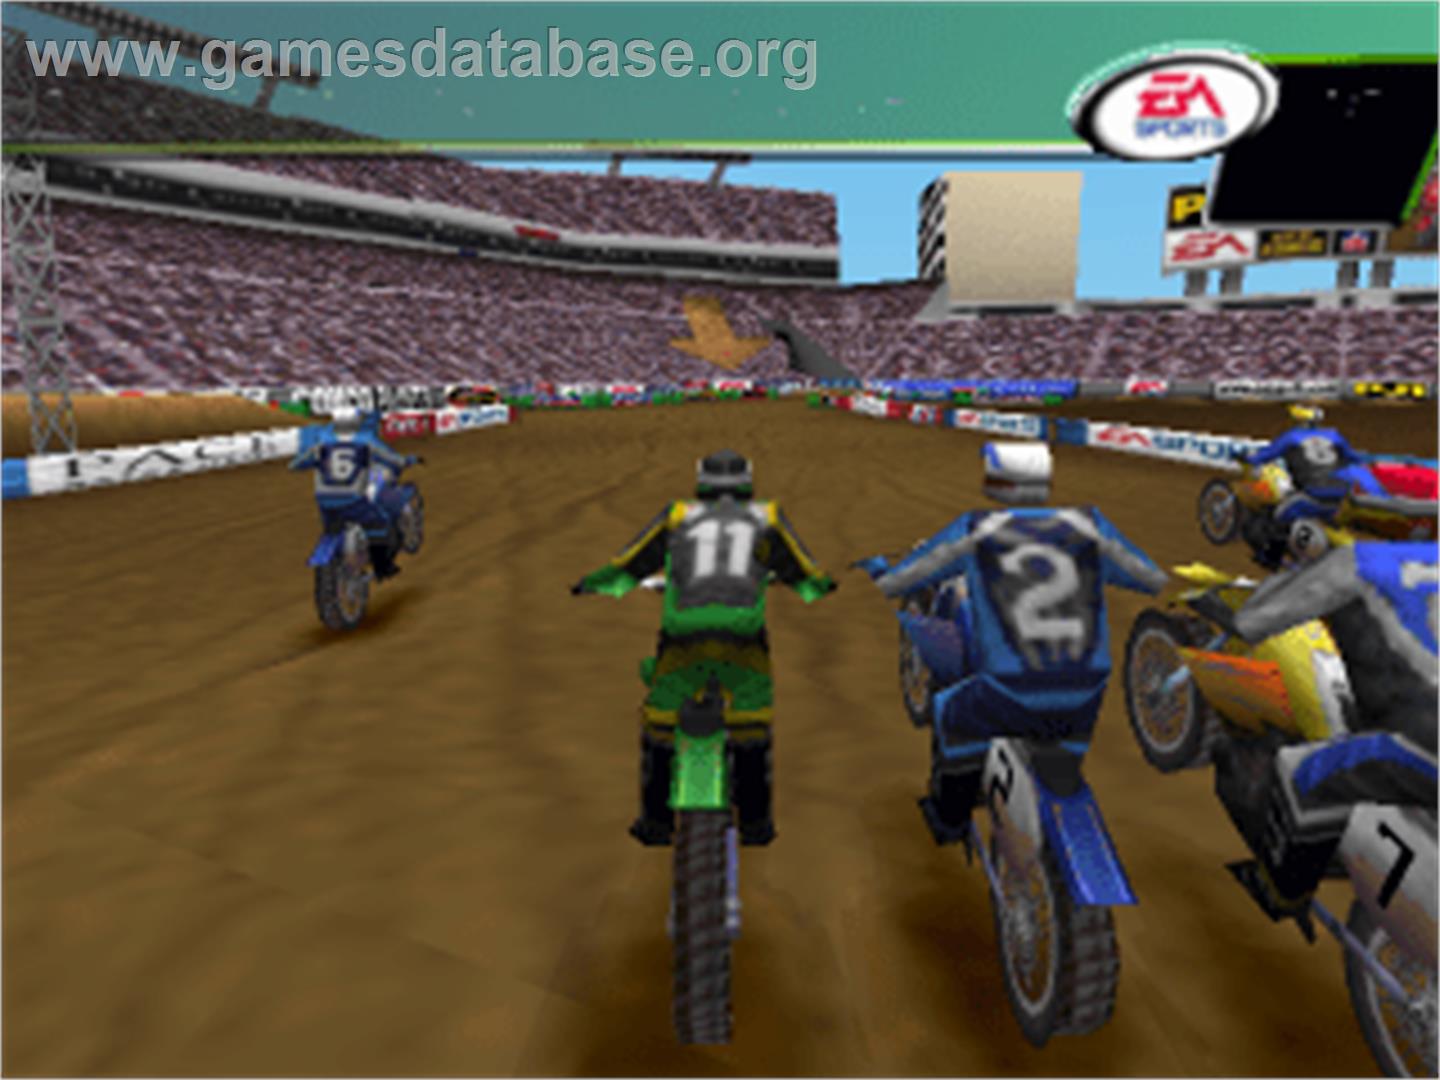 Supercross 2000 - Sony Playstation - Artwork - In Game